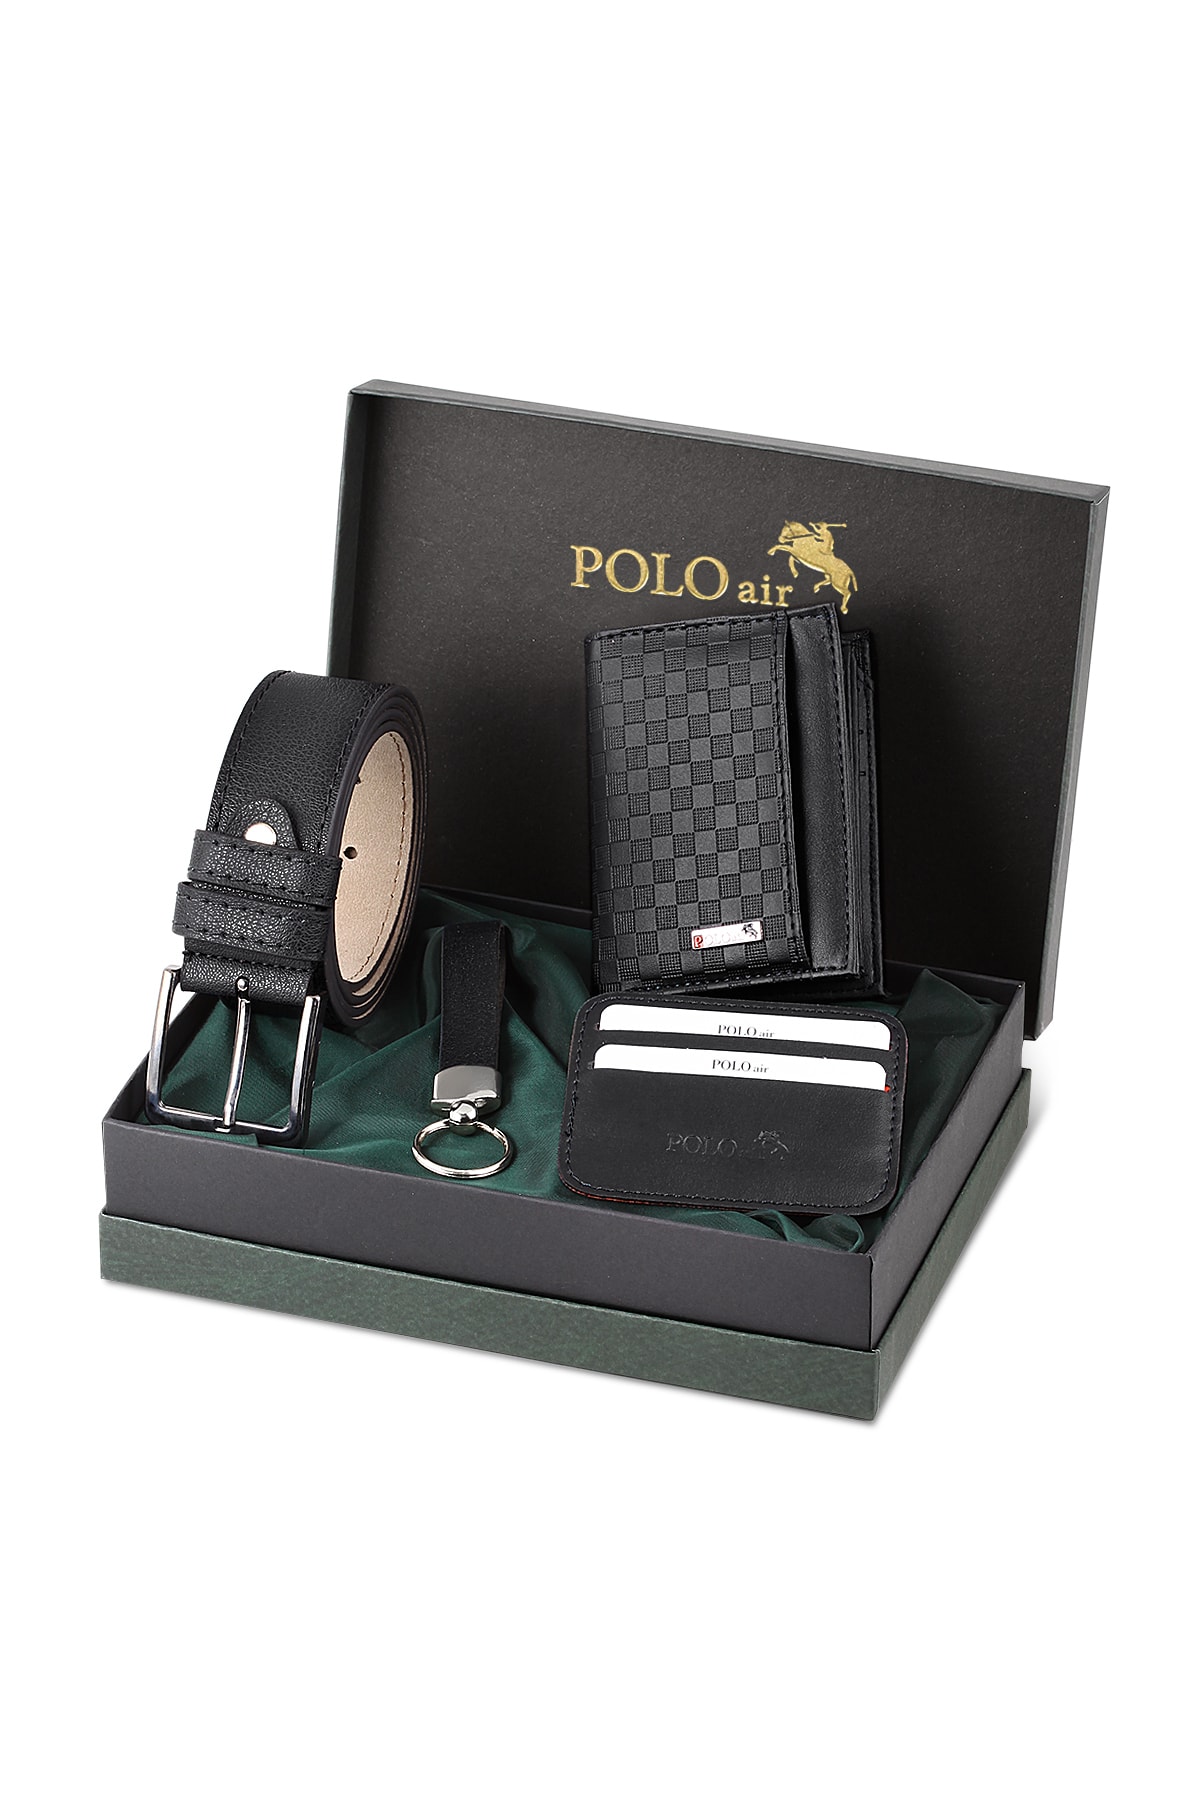 Polo Air Checkerboard Pattern Wallet It Makes It Own Card Holder Belt Keychain Combine Black Set.